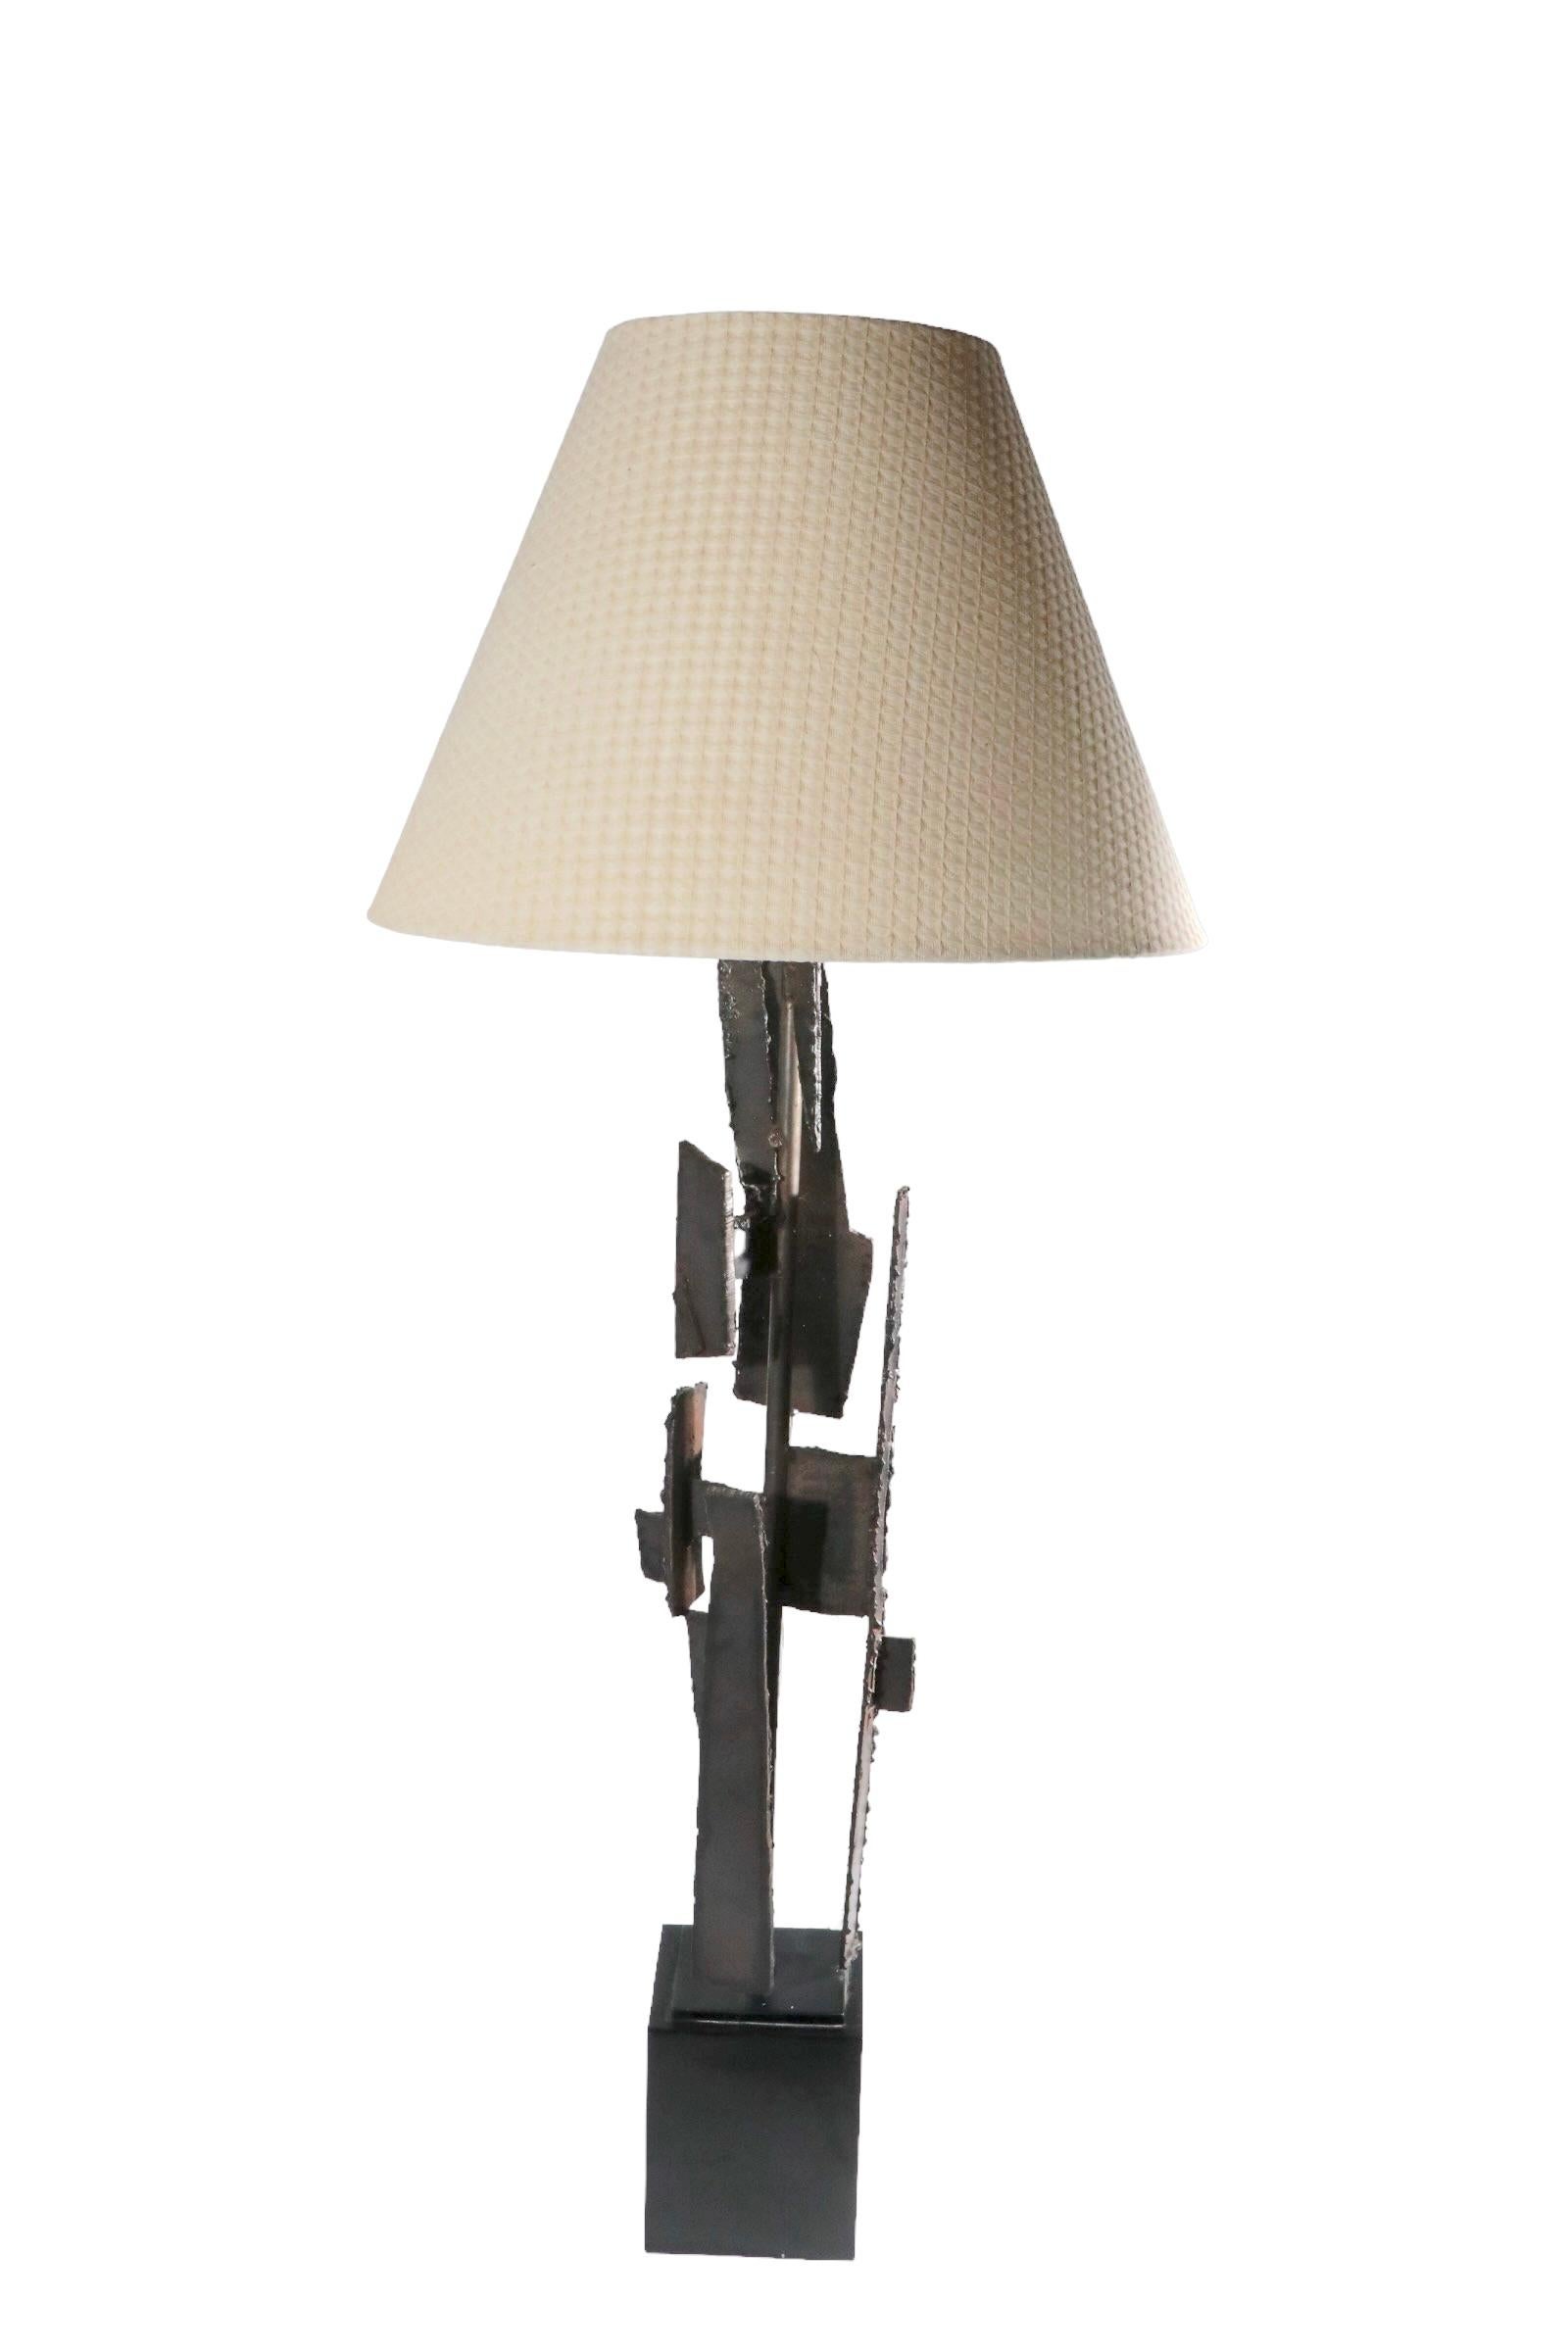 20th Century Brutalist Table Lamp by Harry Balmer for the Laurel Lamp Company, ca. 1970's For Sale